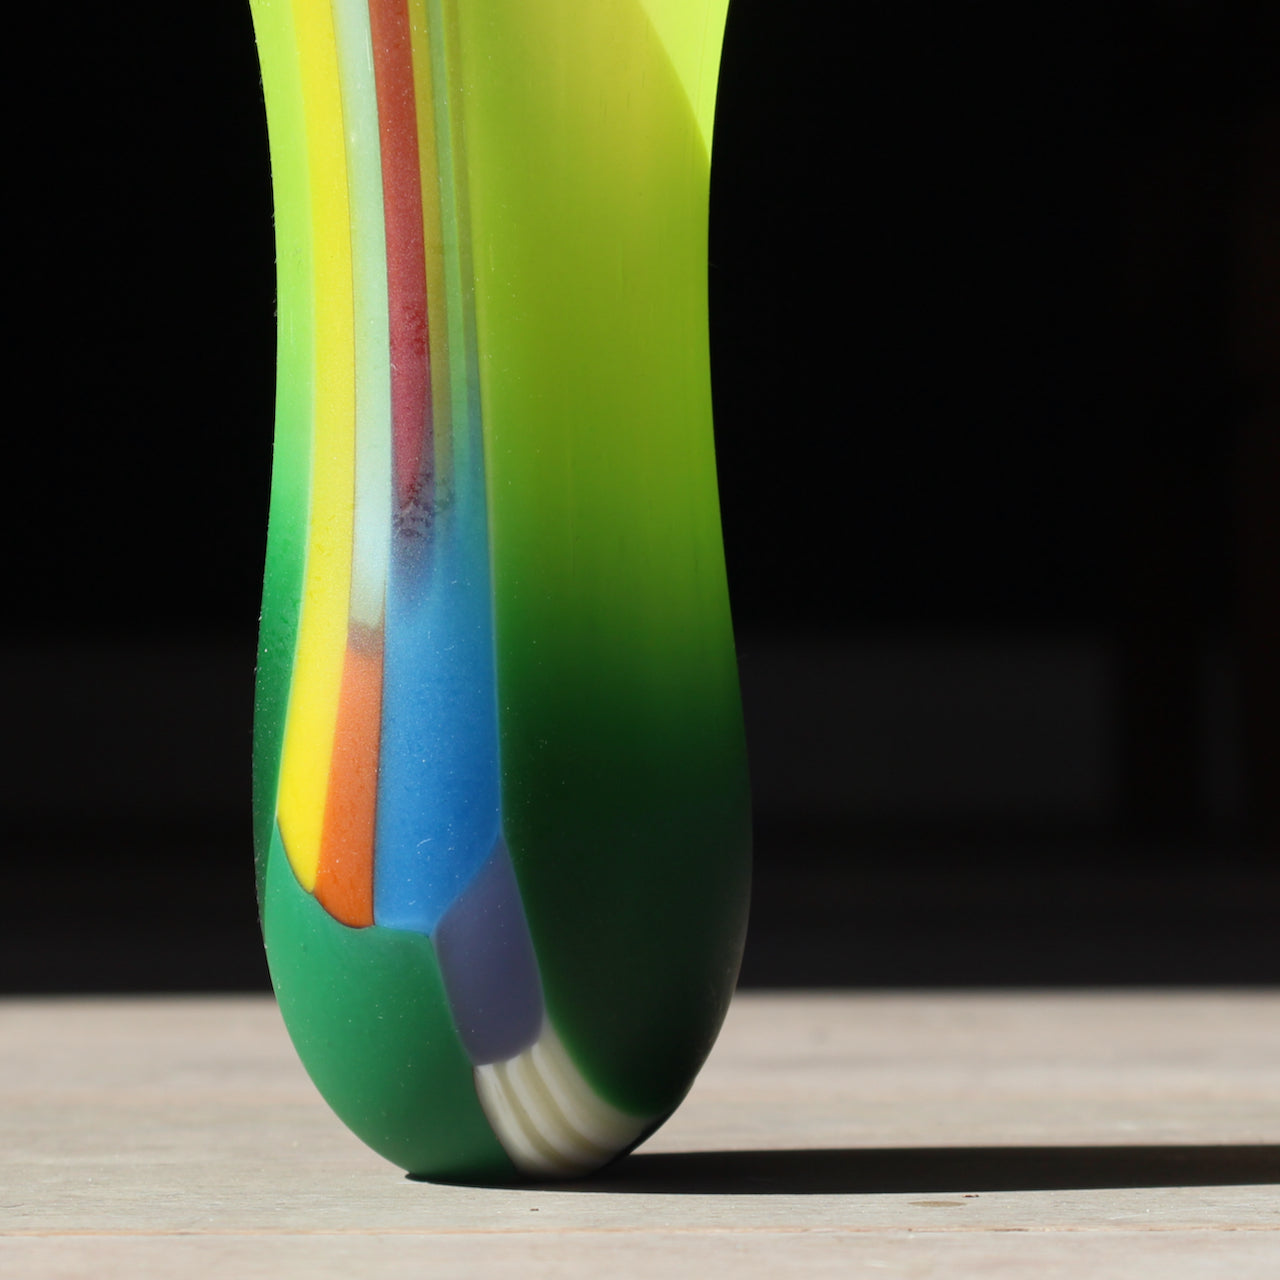 Narrow vibrant coloured glass vase in tones of green, yellow, blue and orange by glass artist Ruth Shelley.